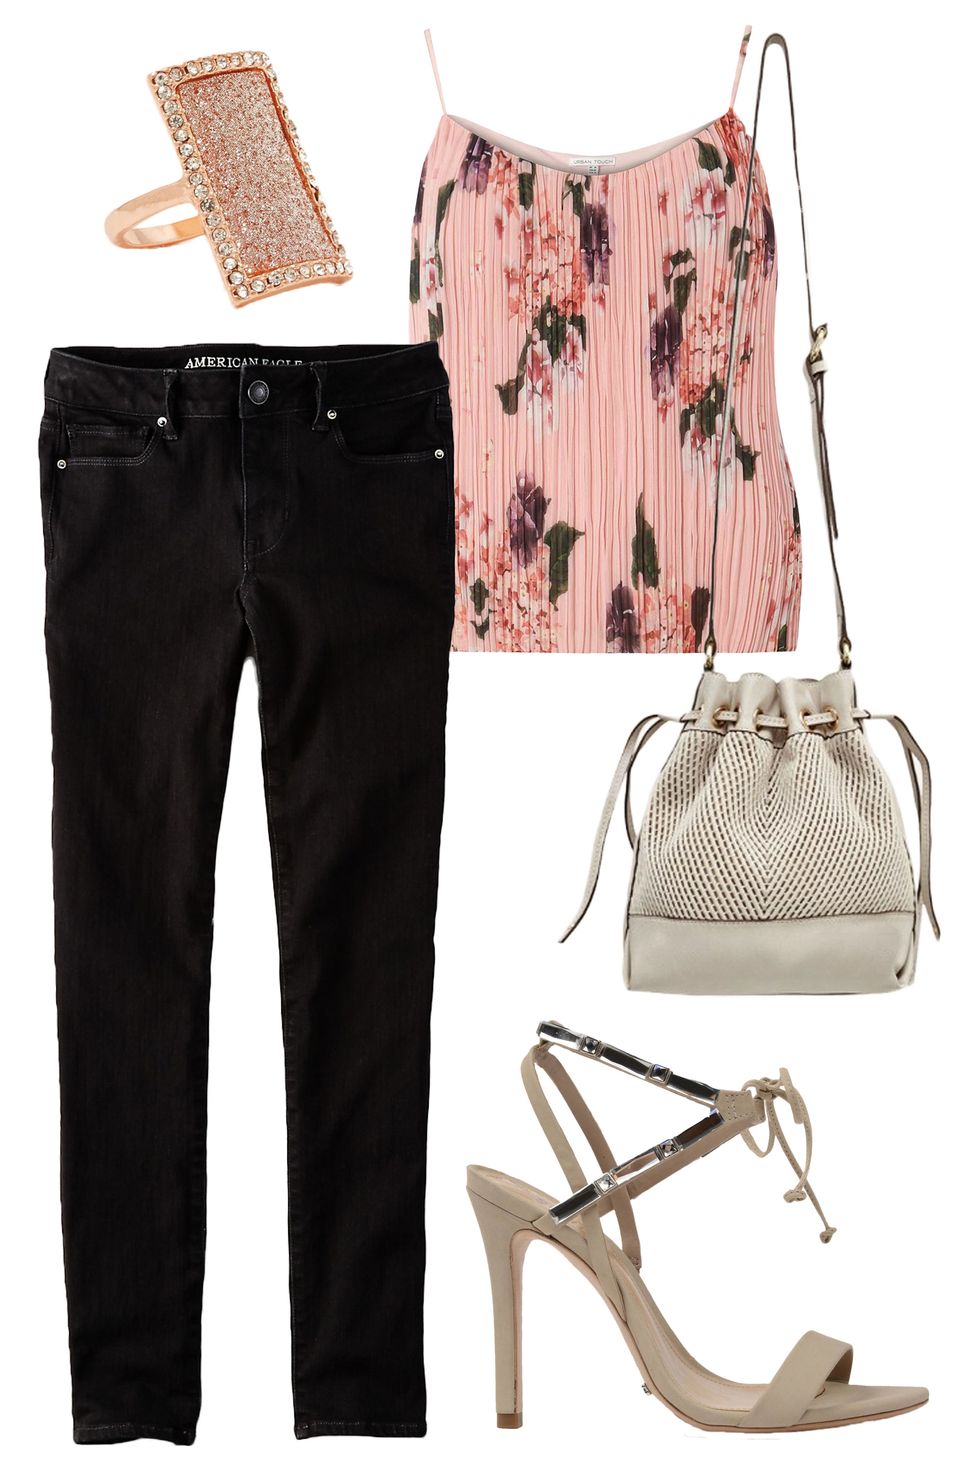 Affordable date night look! #women'sfashiondate